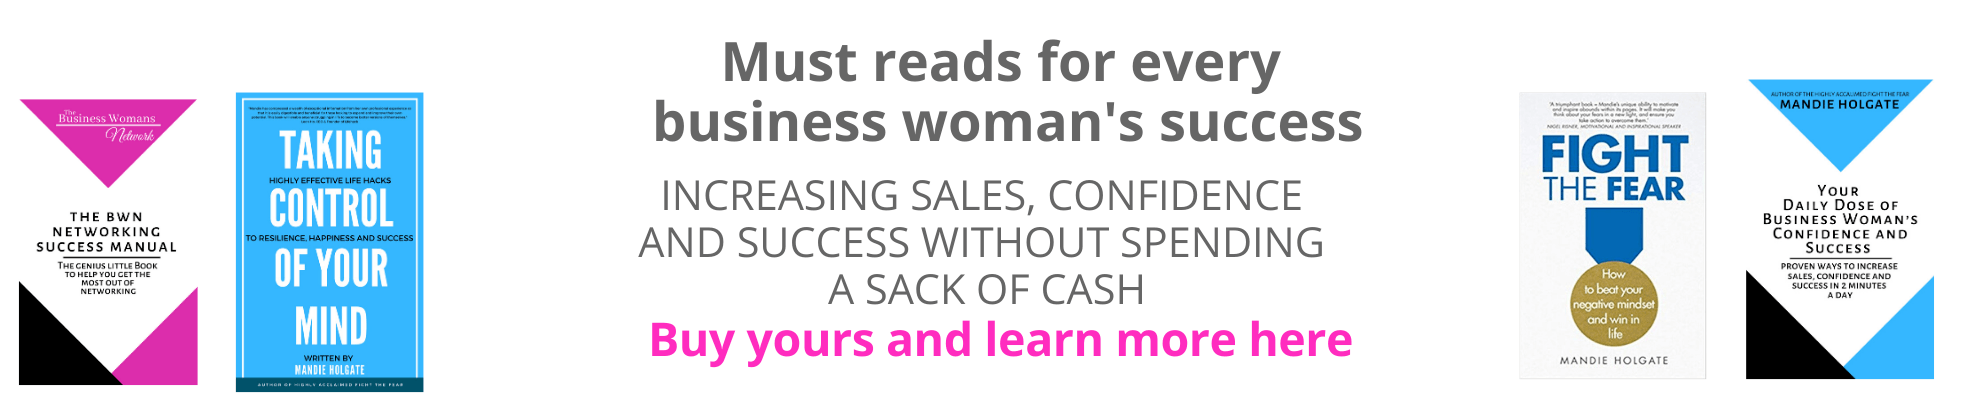 Books for women in business 